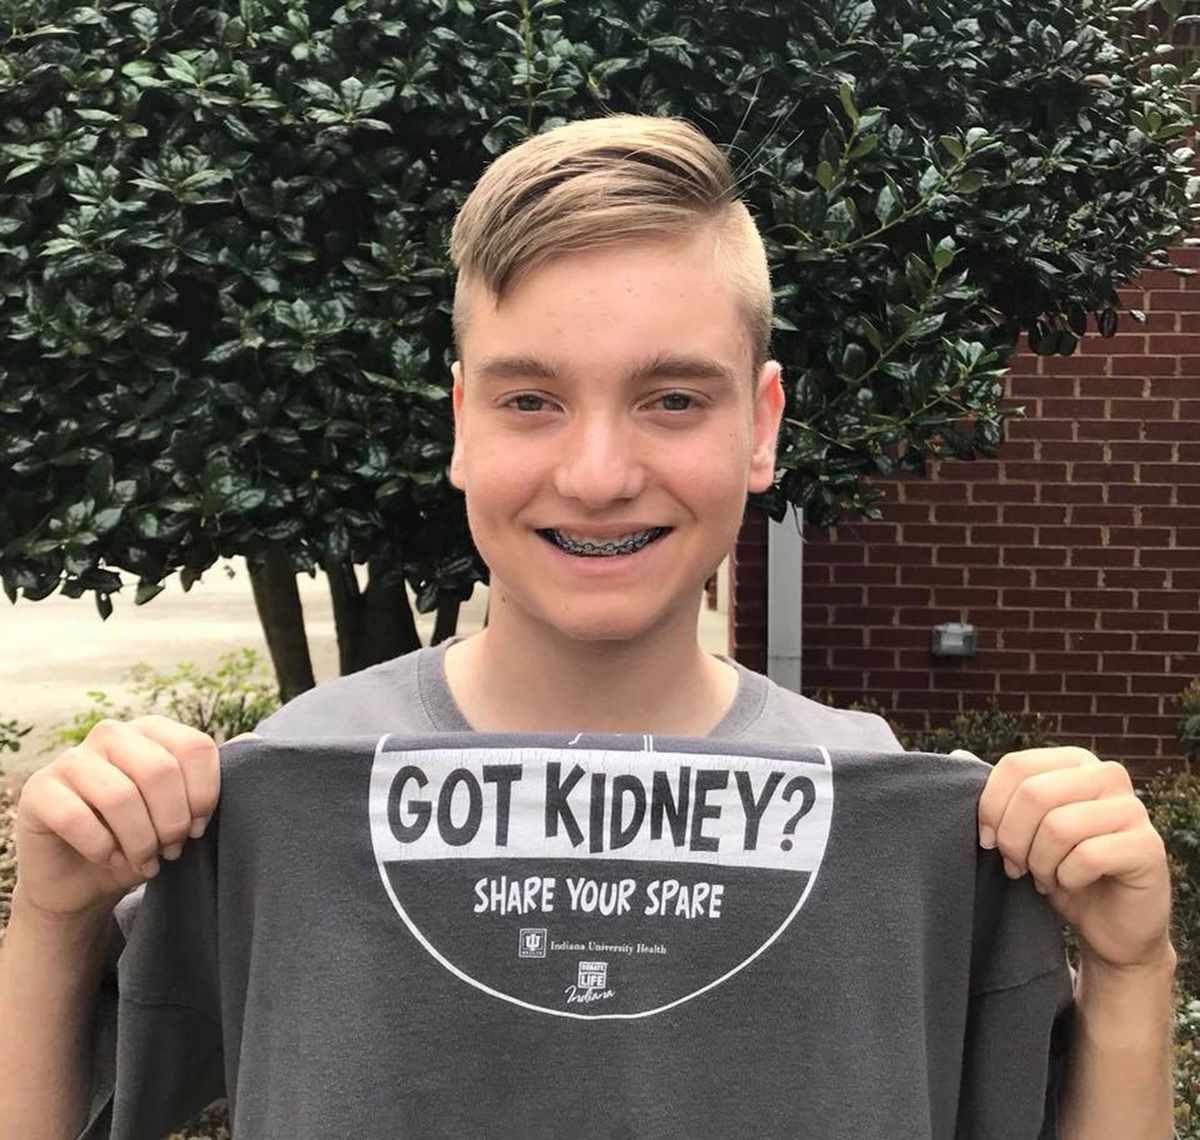 6th Grade Teacher Donates His Kidney to Save Student's Life: 'There Is No Greater Gift'